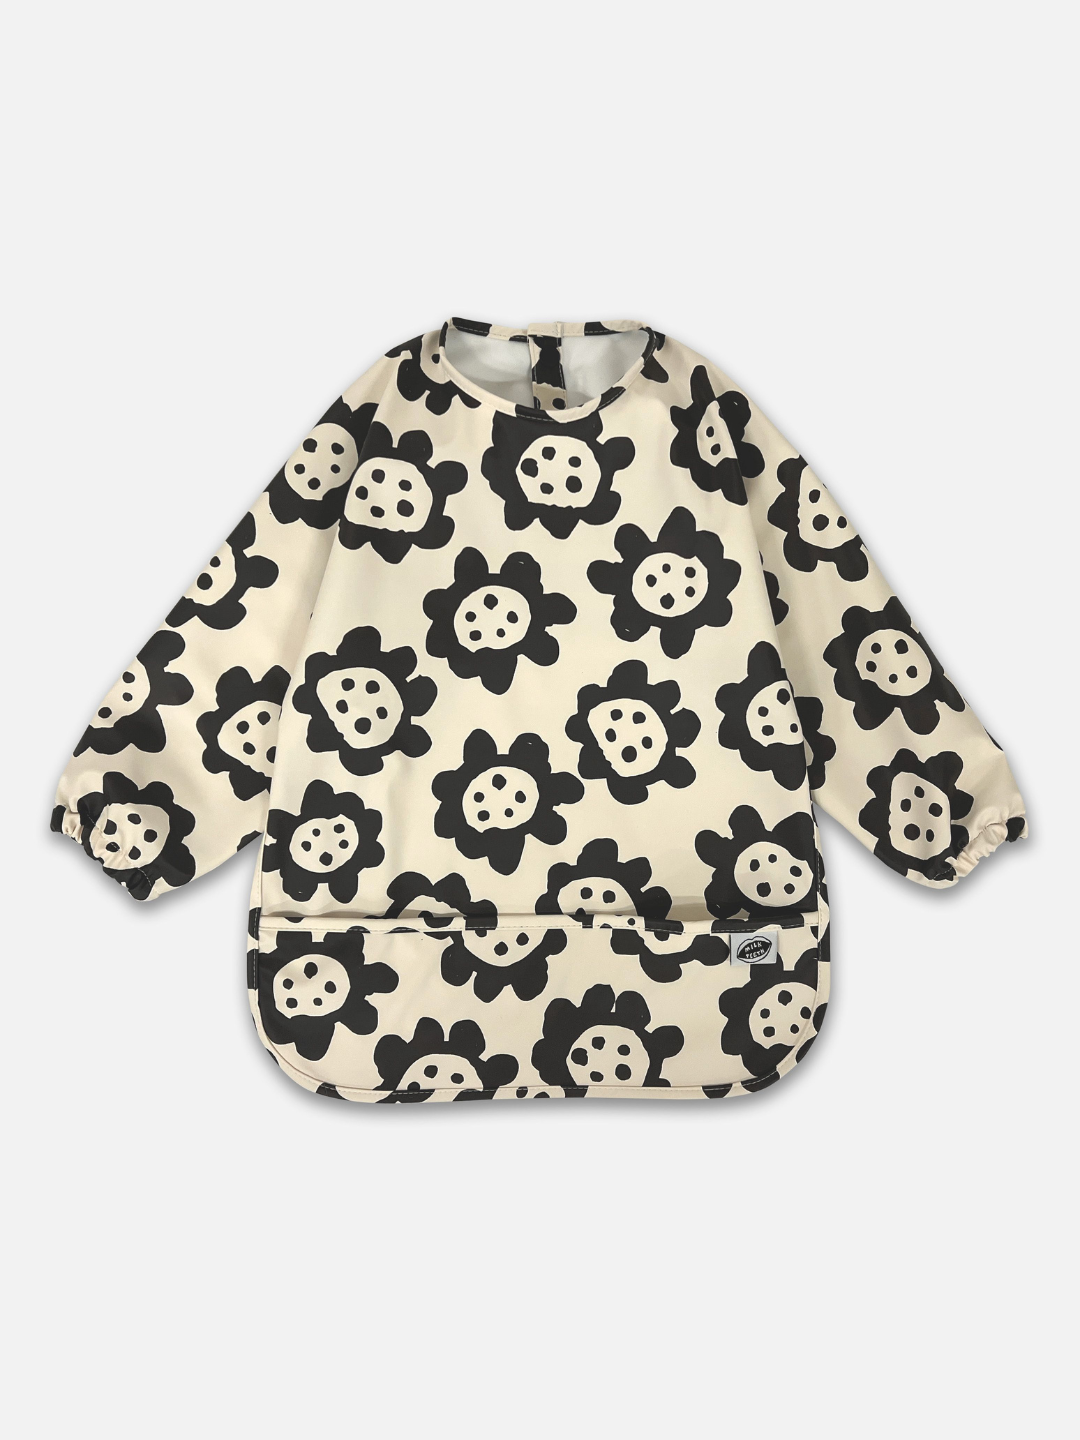 Black Sunflowers | A front view of the long sleeve cream colored bib with black sunflowers and a front pocket.